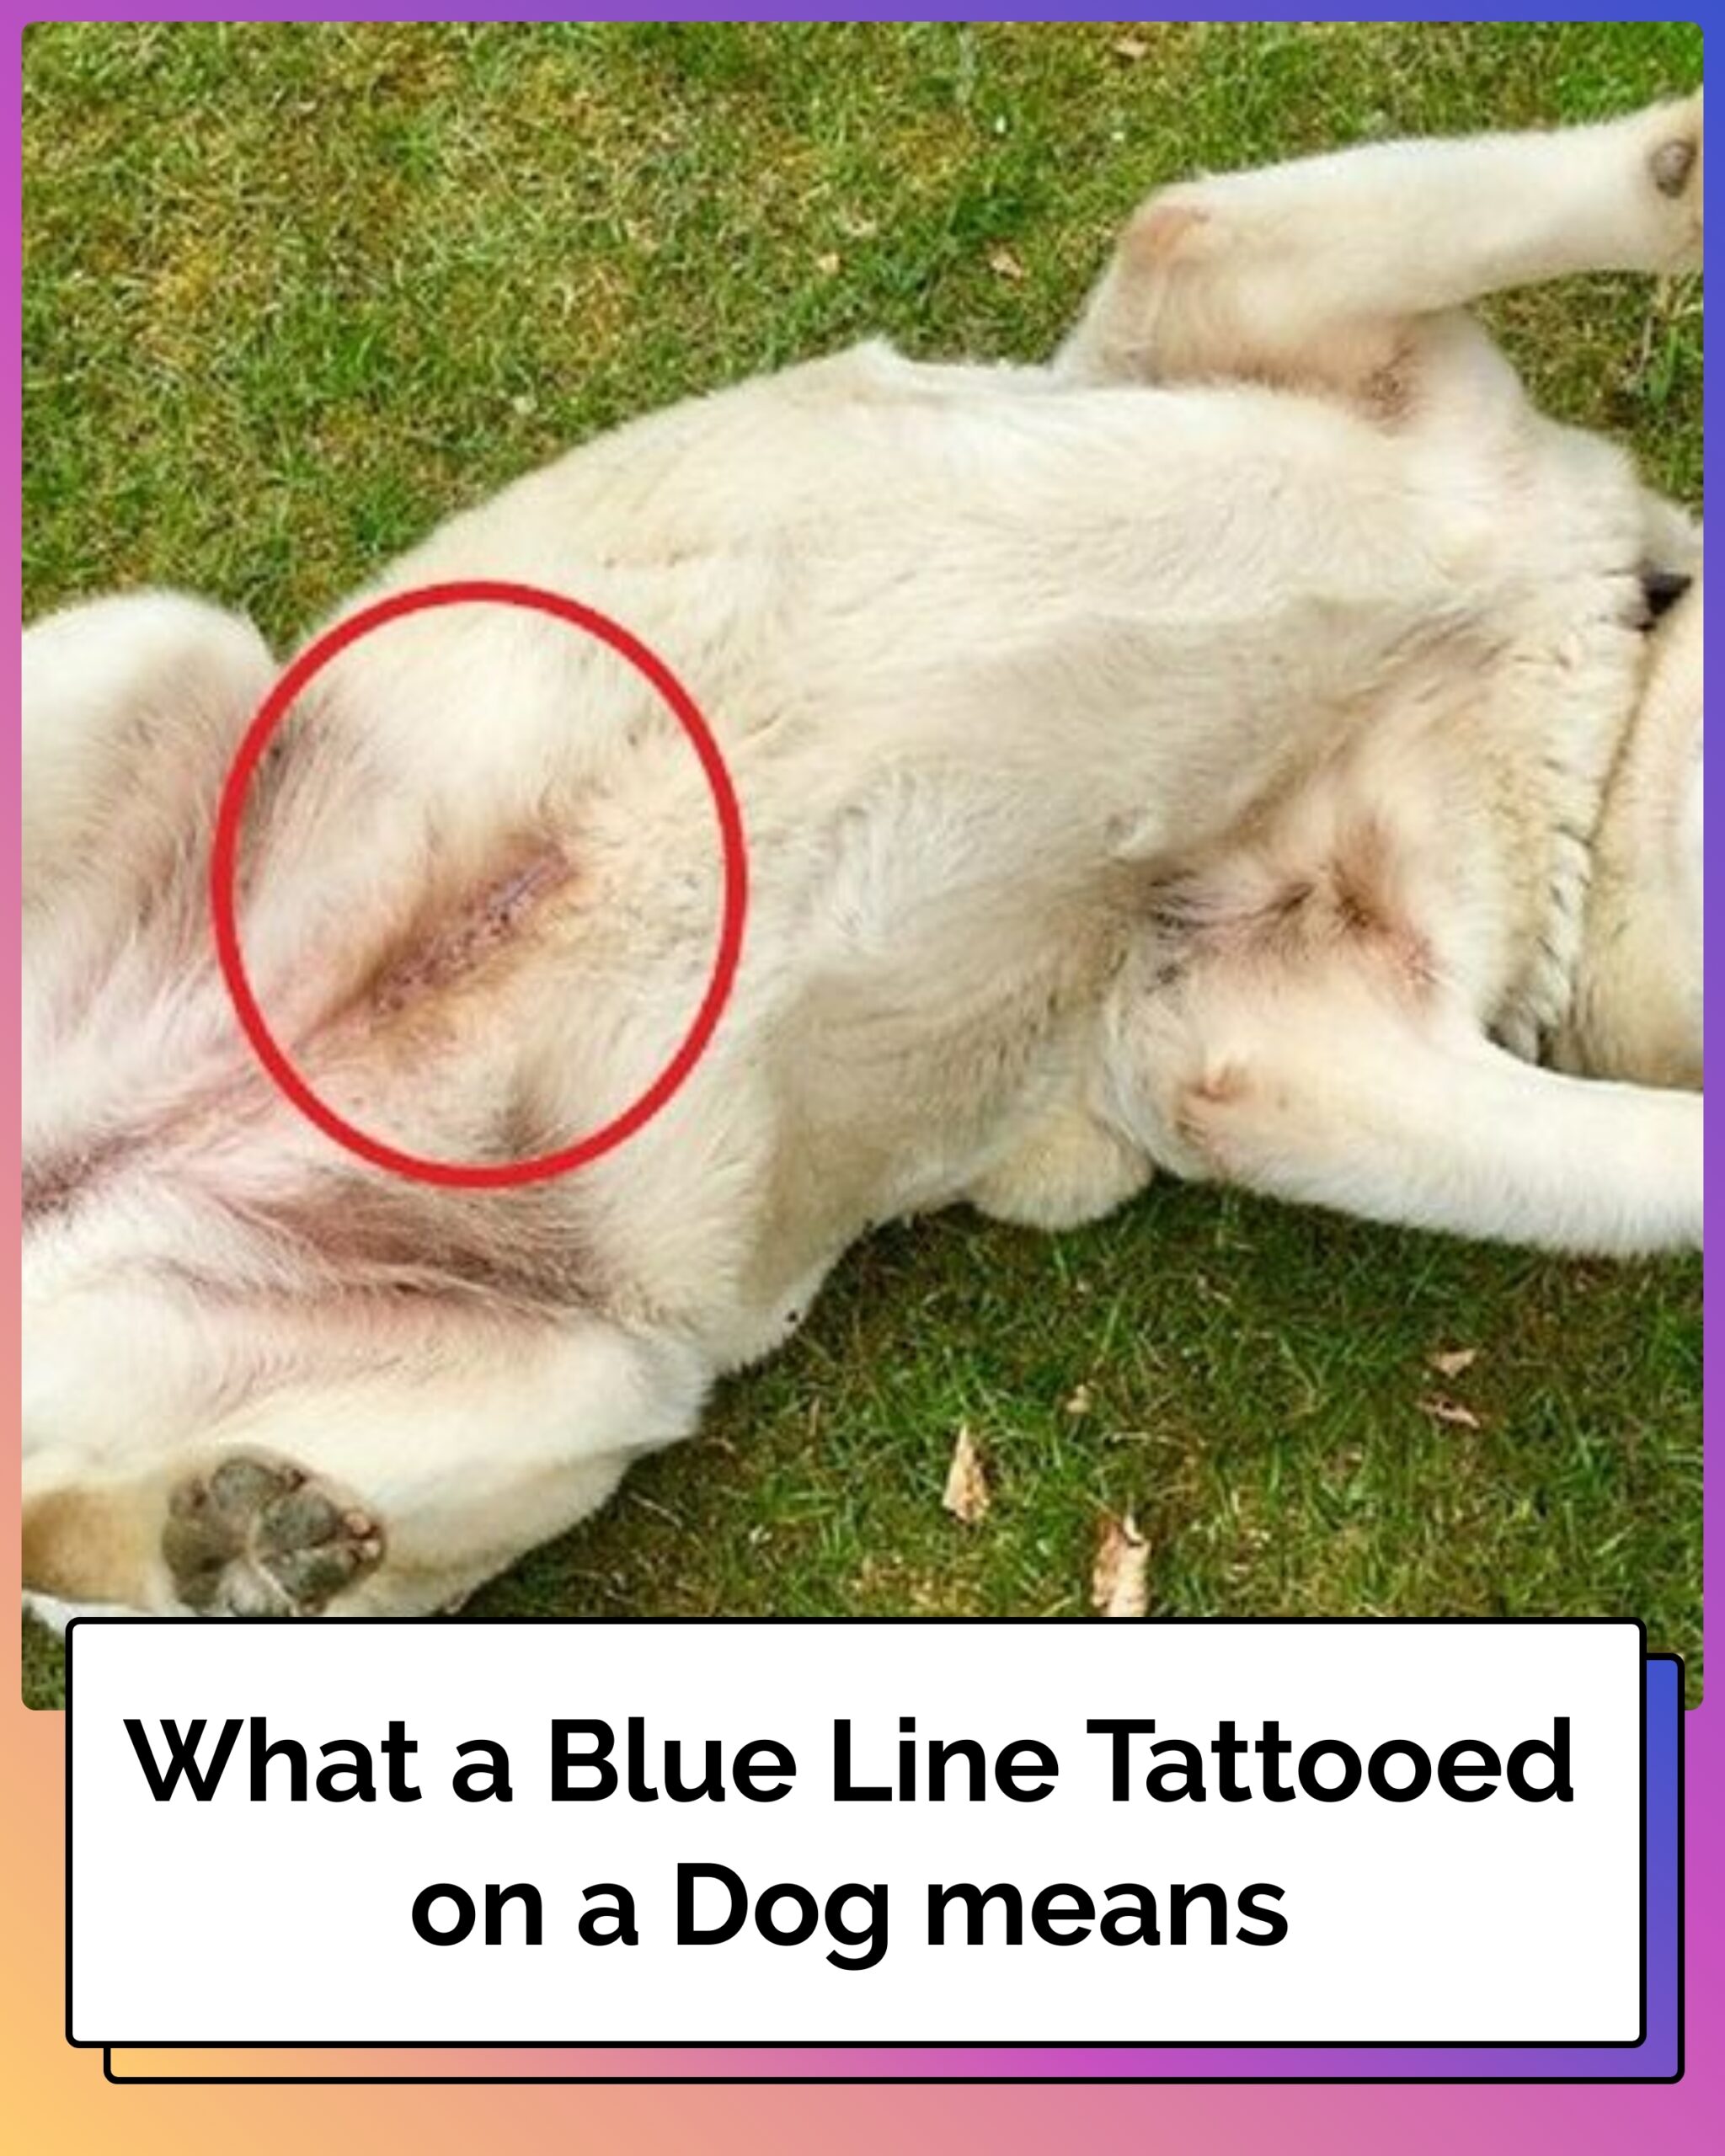 What a Blue Line Tattooed on a Dog Means